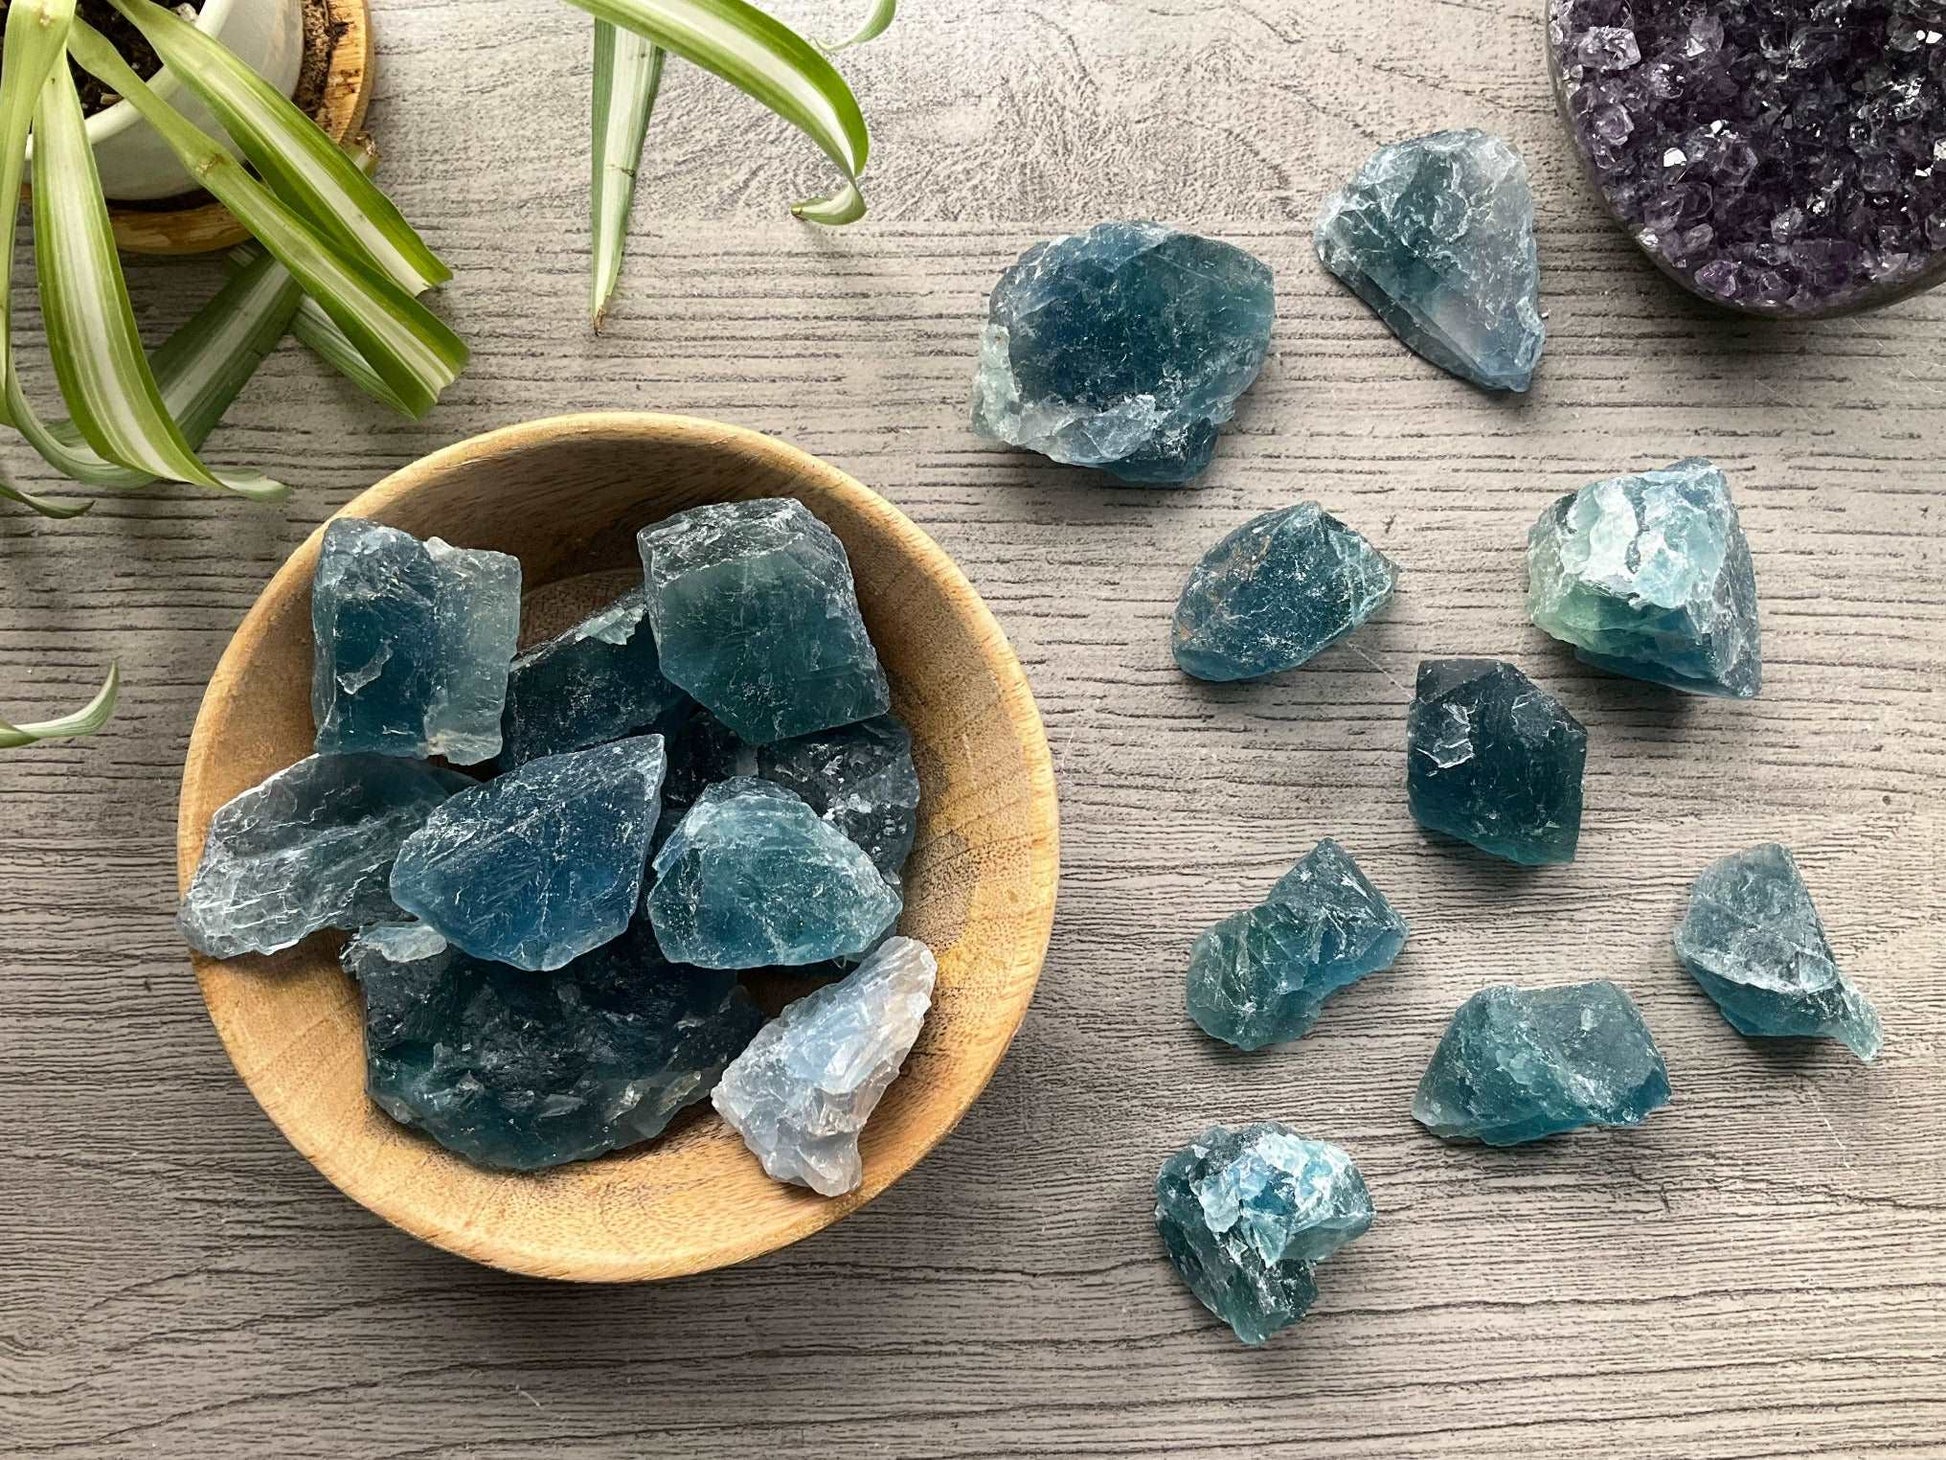 Pictured are various pieces of raw blue fluorite.